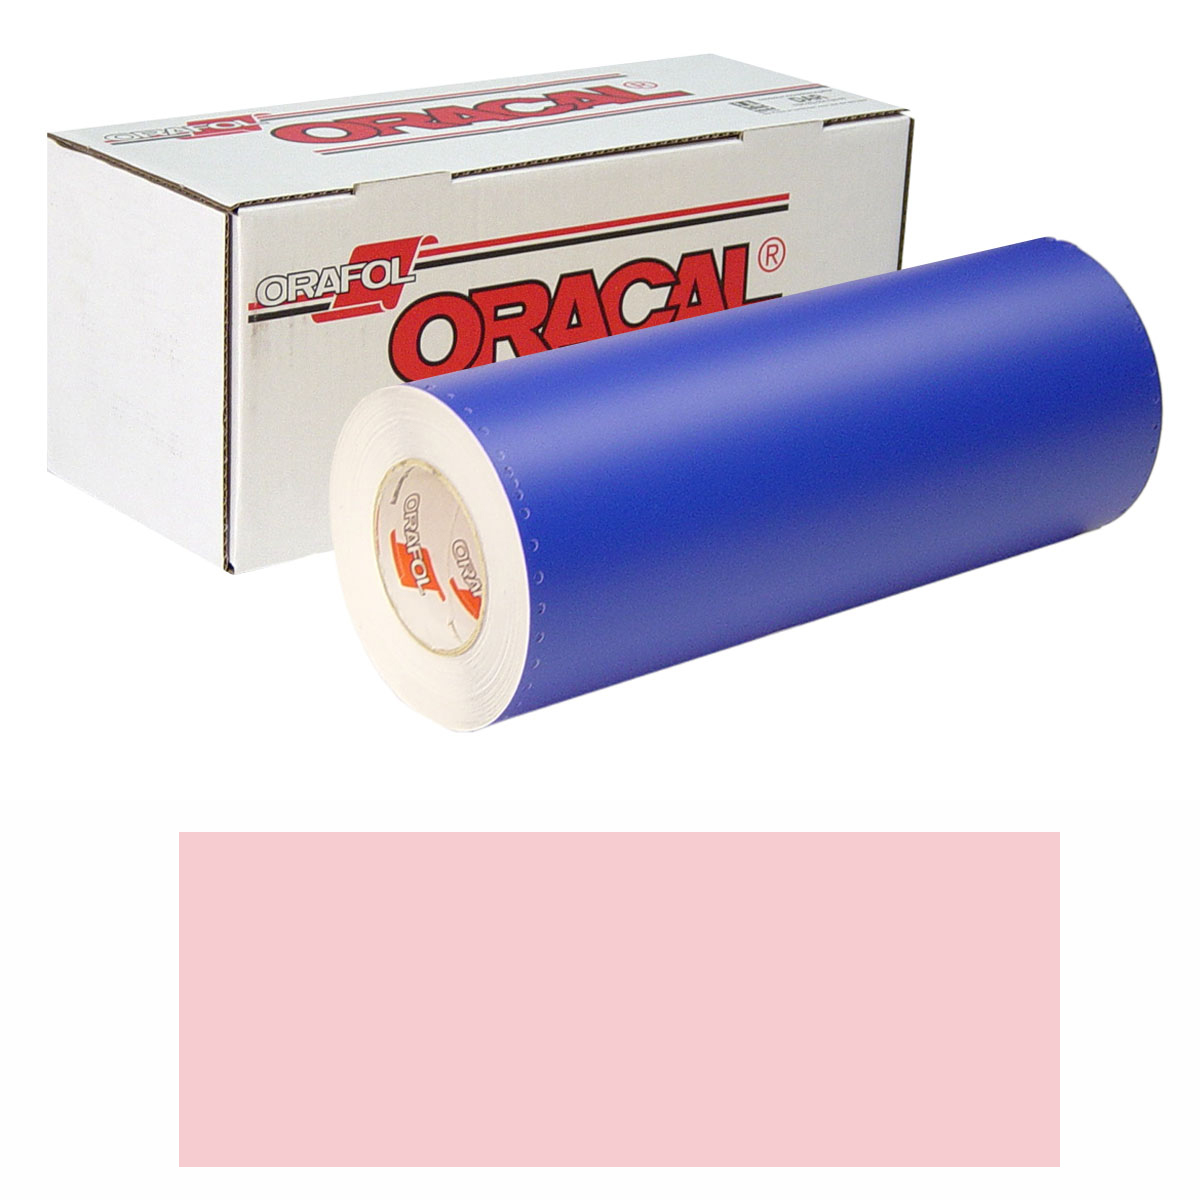 ORACAL 8300 15in X 50yd 085 Pale-Pink